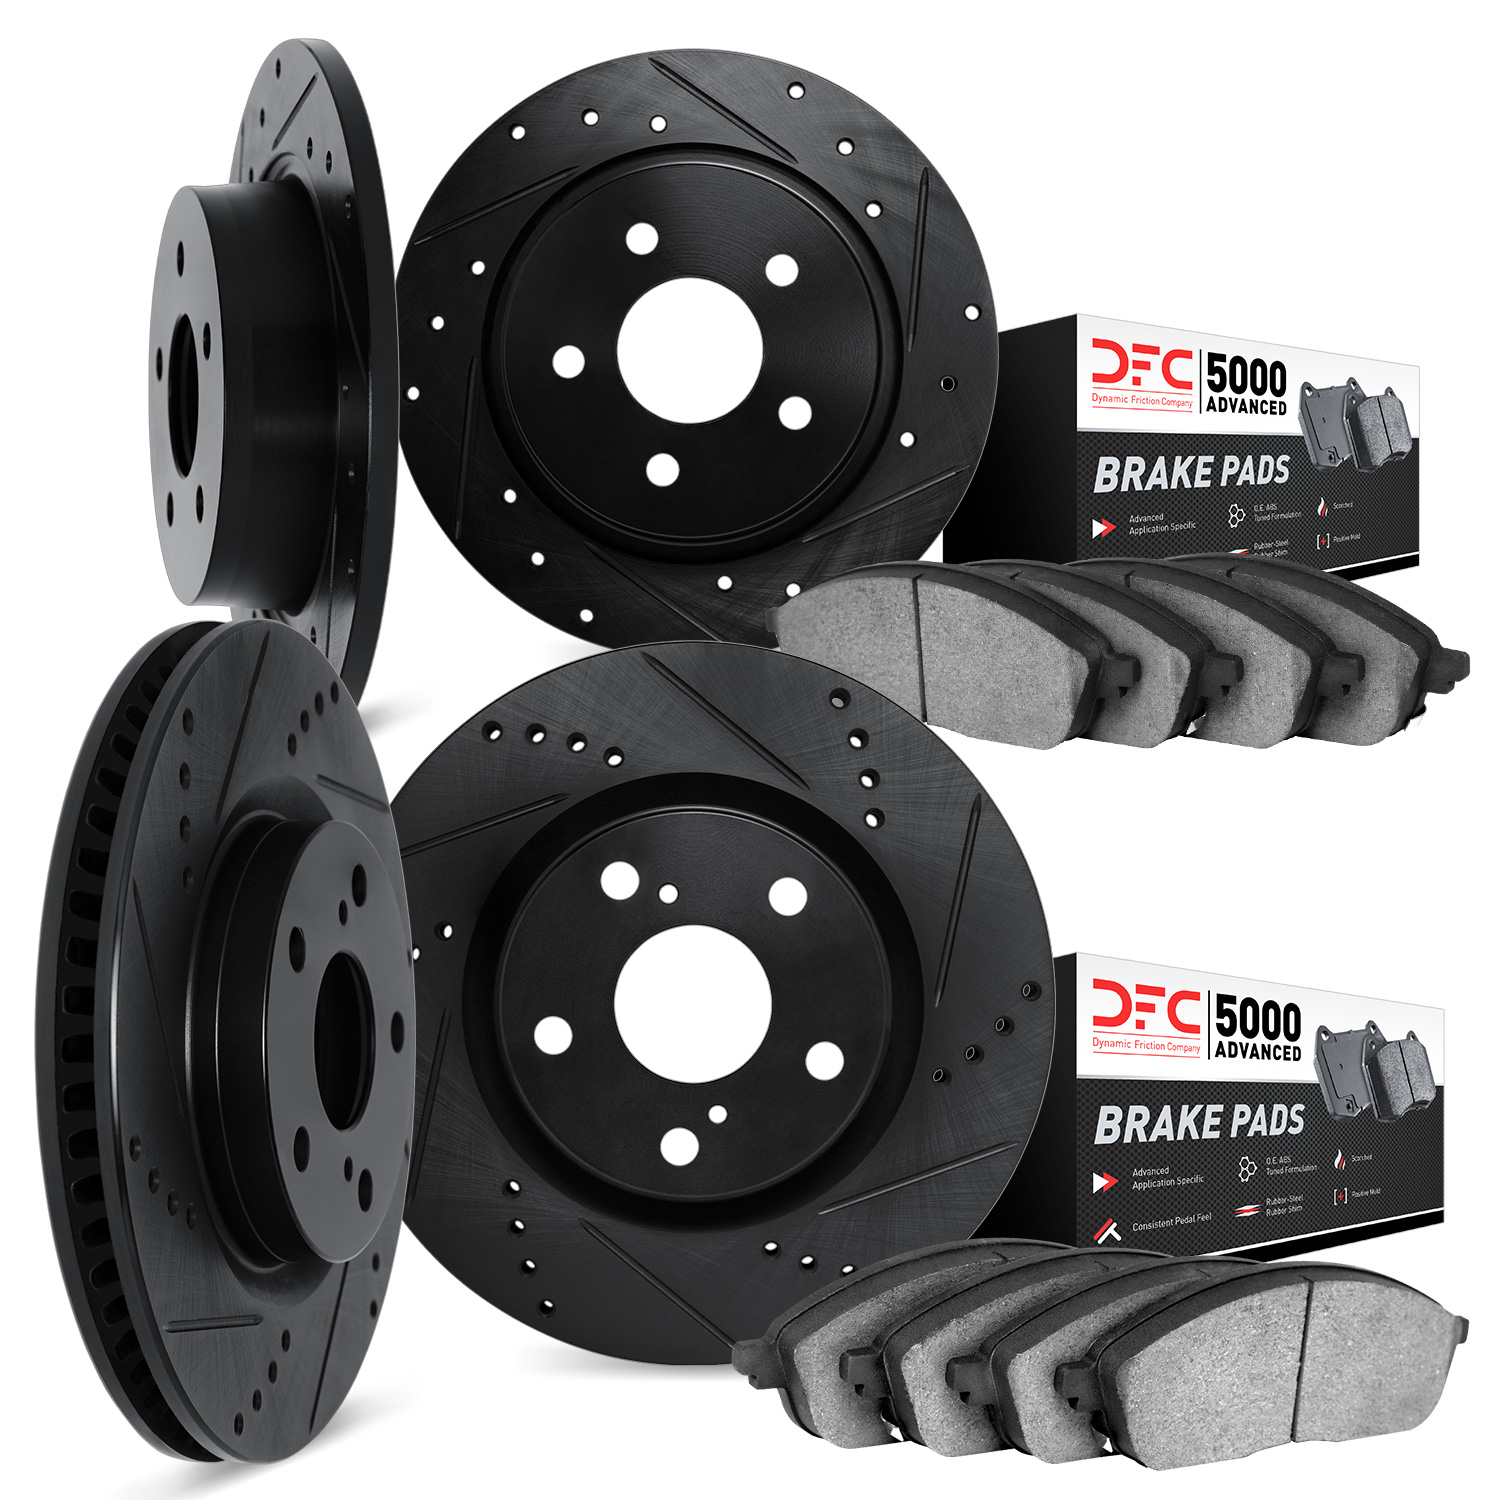 8504-76138 Drilled/Slotted Brake Rotors w/5000 Advanced Brake Pads Kit [Black], 2001-2003 Lexus/Toyota/Scion, Position: Front an